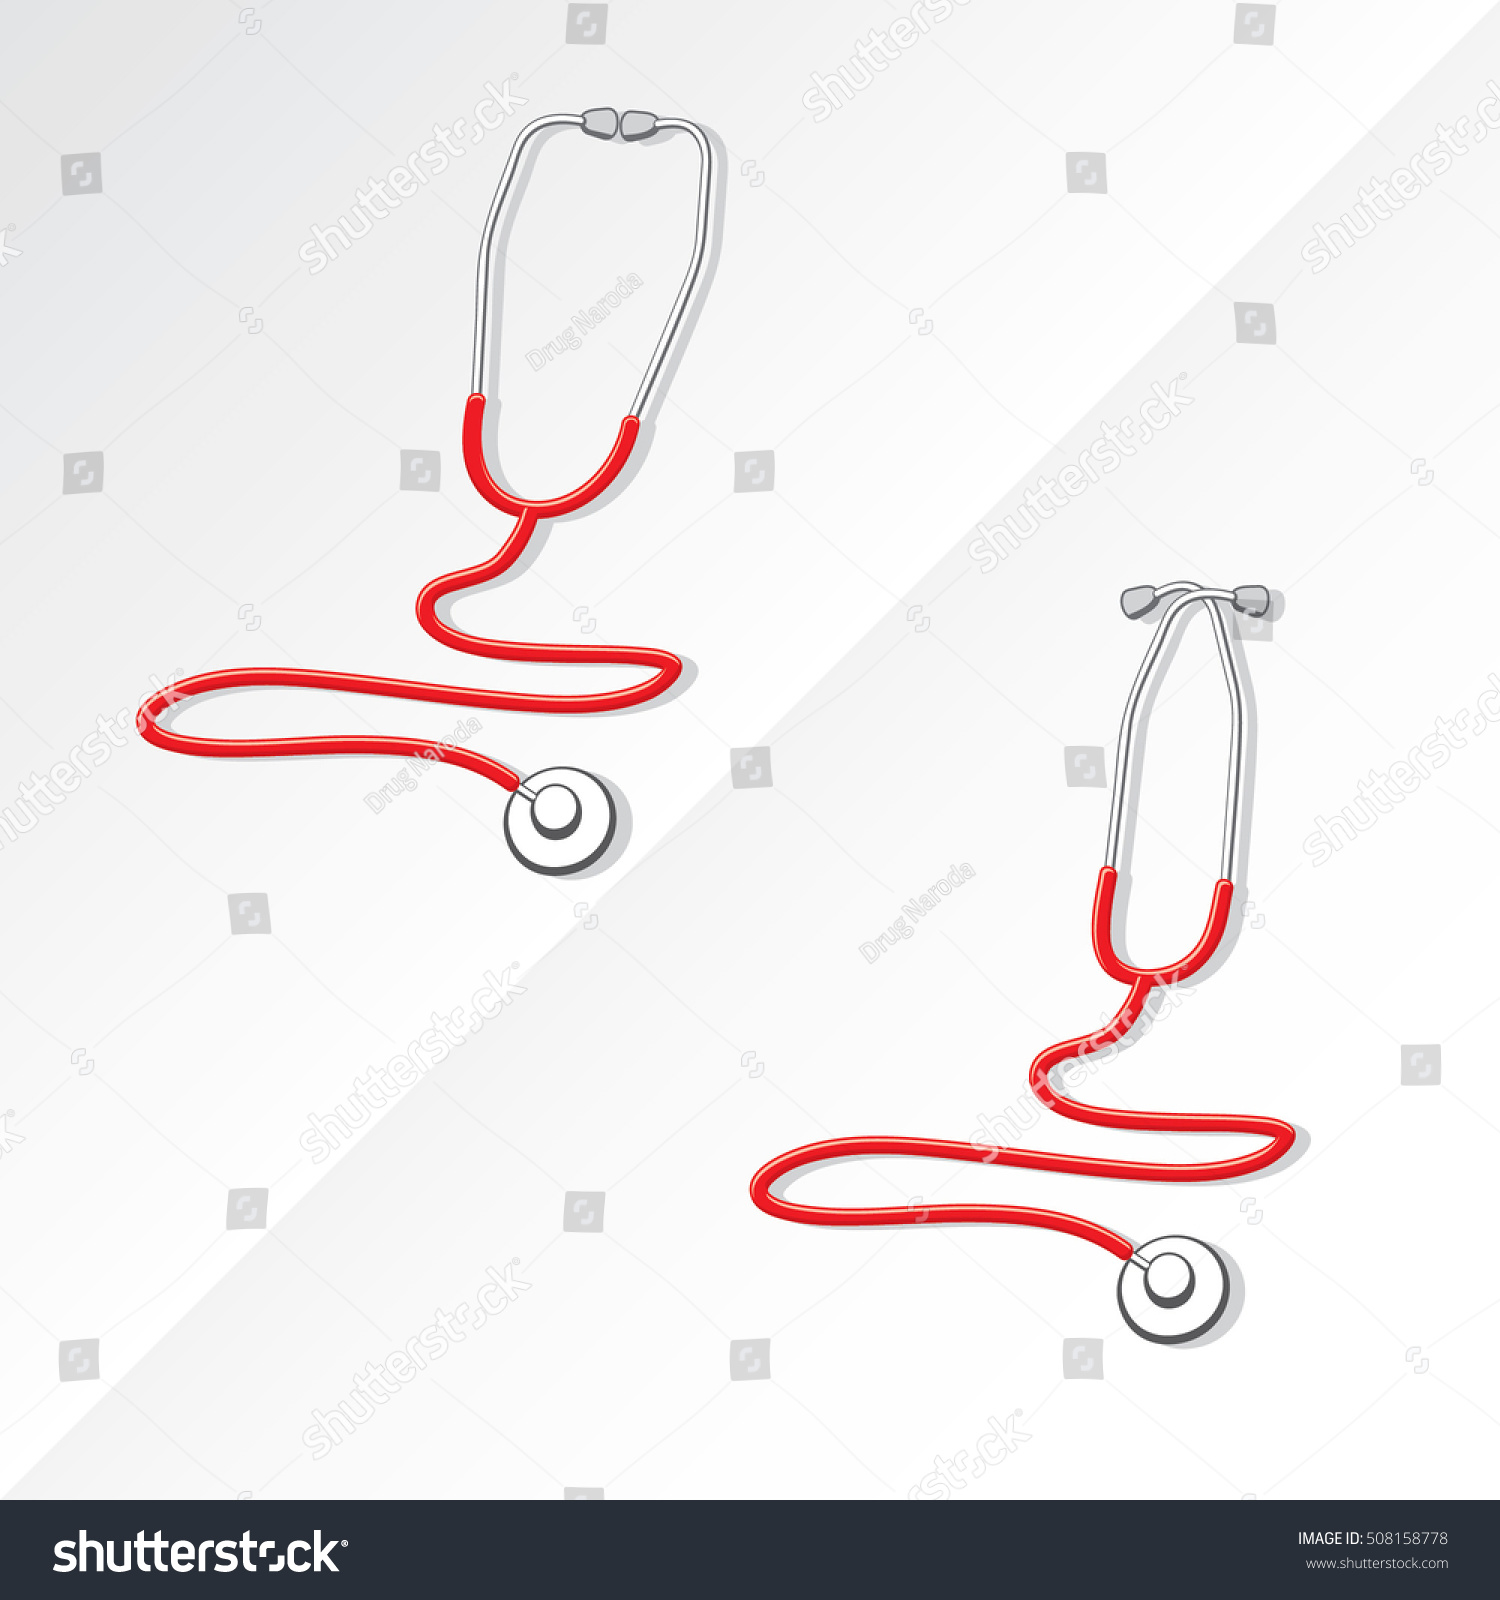 SVG of Two Medical Stethoscopes with Zigzag Shape Tubing Icons Set One with Crossed Binaural Another with Eartips Put Together - Grayscale and Red Objects on White Background - Realistic Flat Design svg